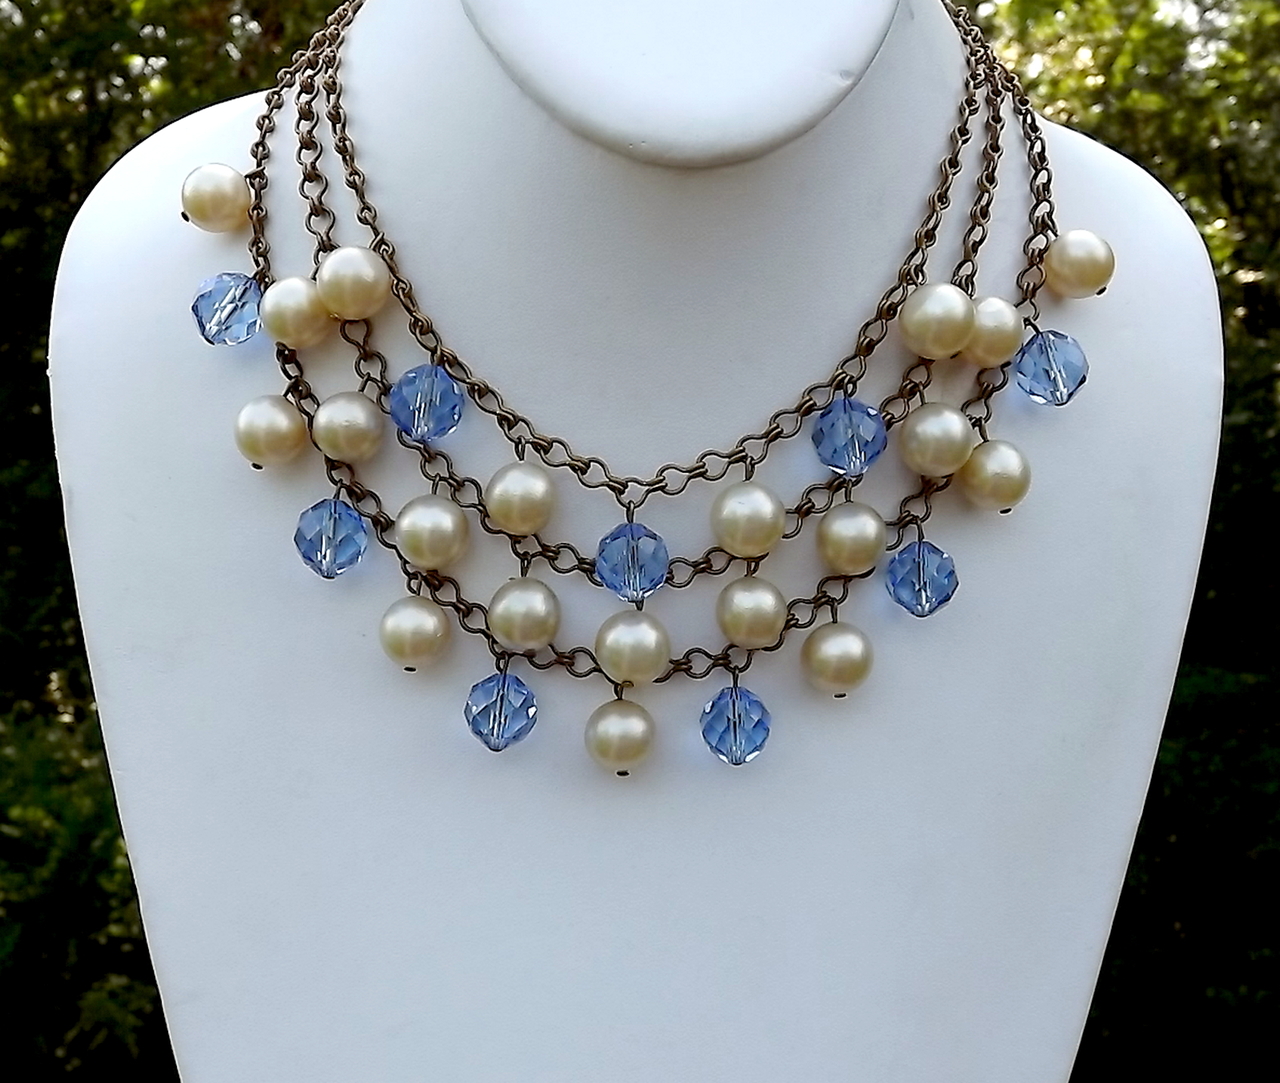 Vintage Pearl Necklace  4 Strands w/Gems, Signed by Louis Rousselet